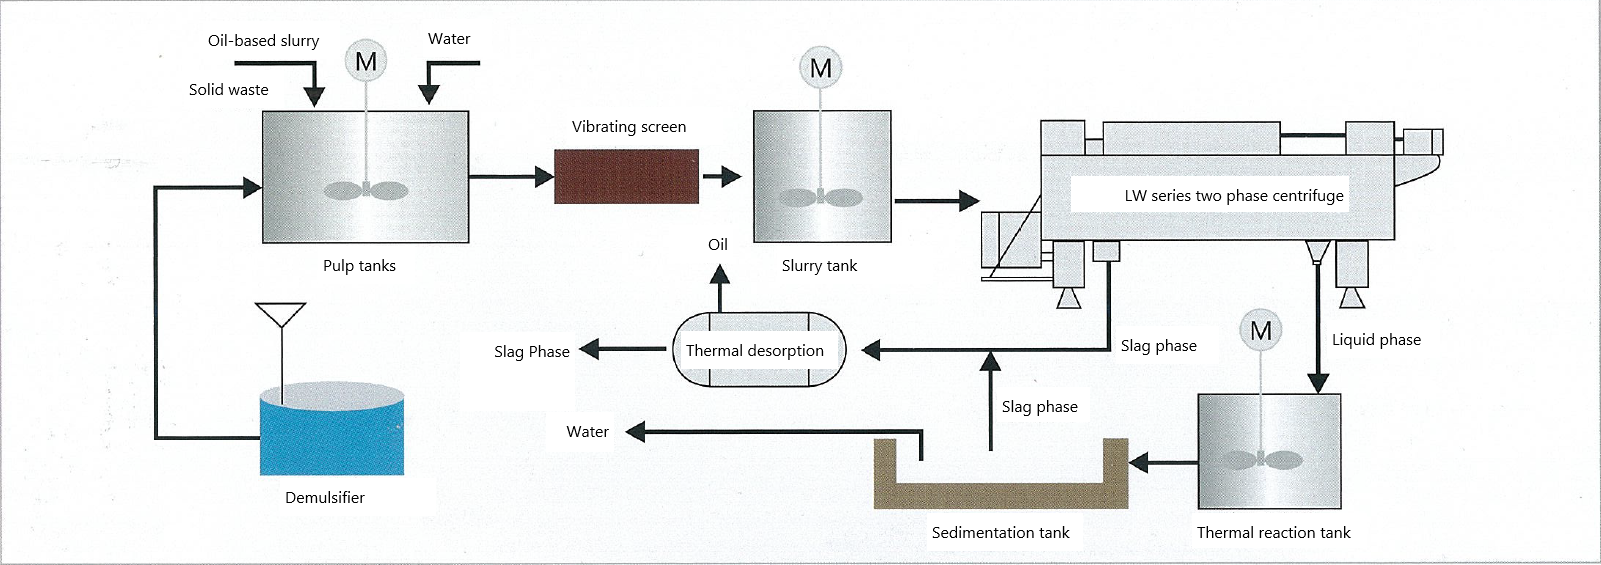 Solid Waste Treatment of Drilling Oil-based Slurry